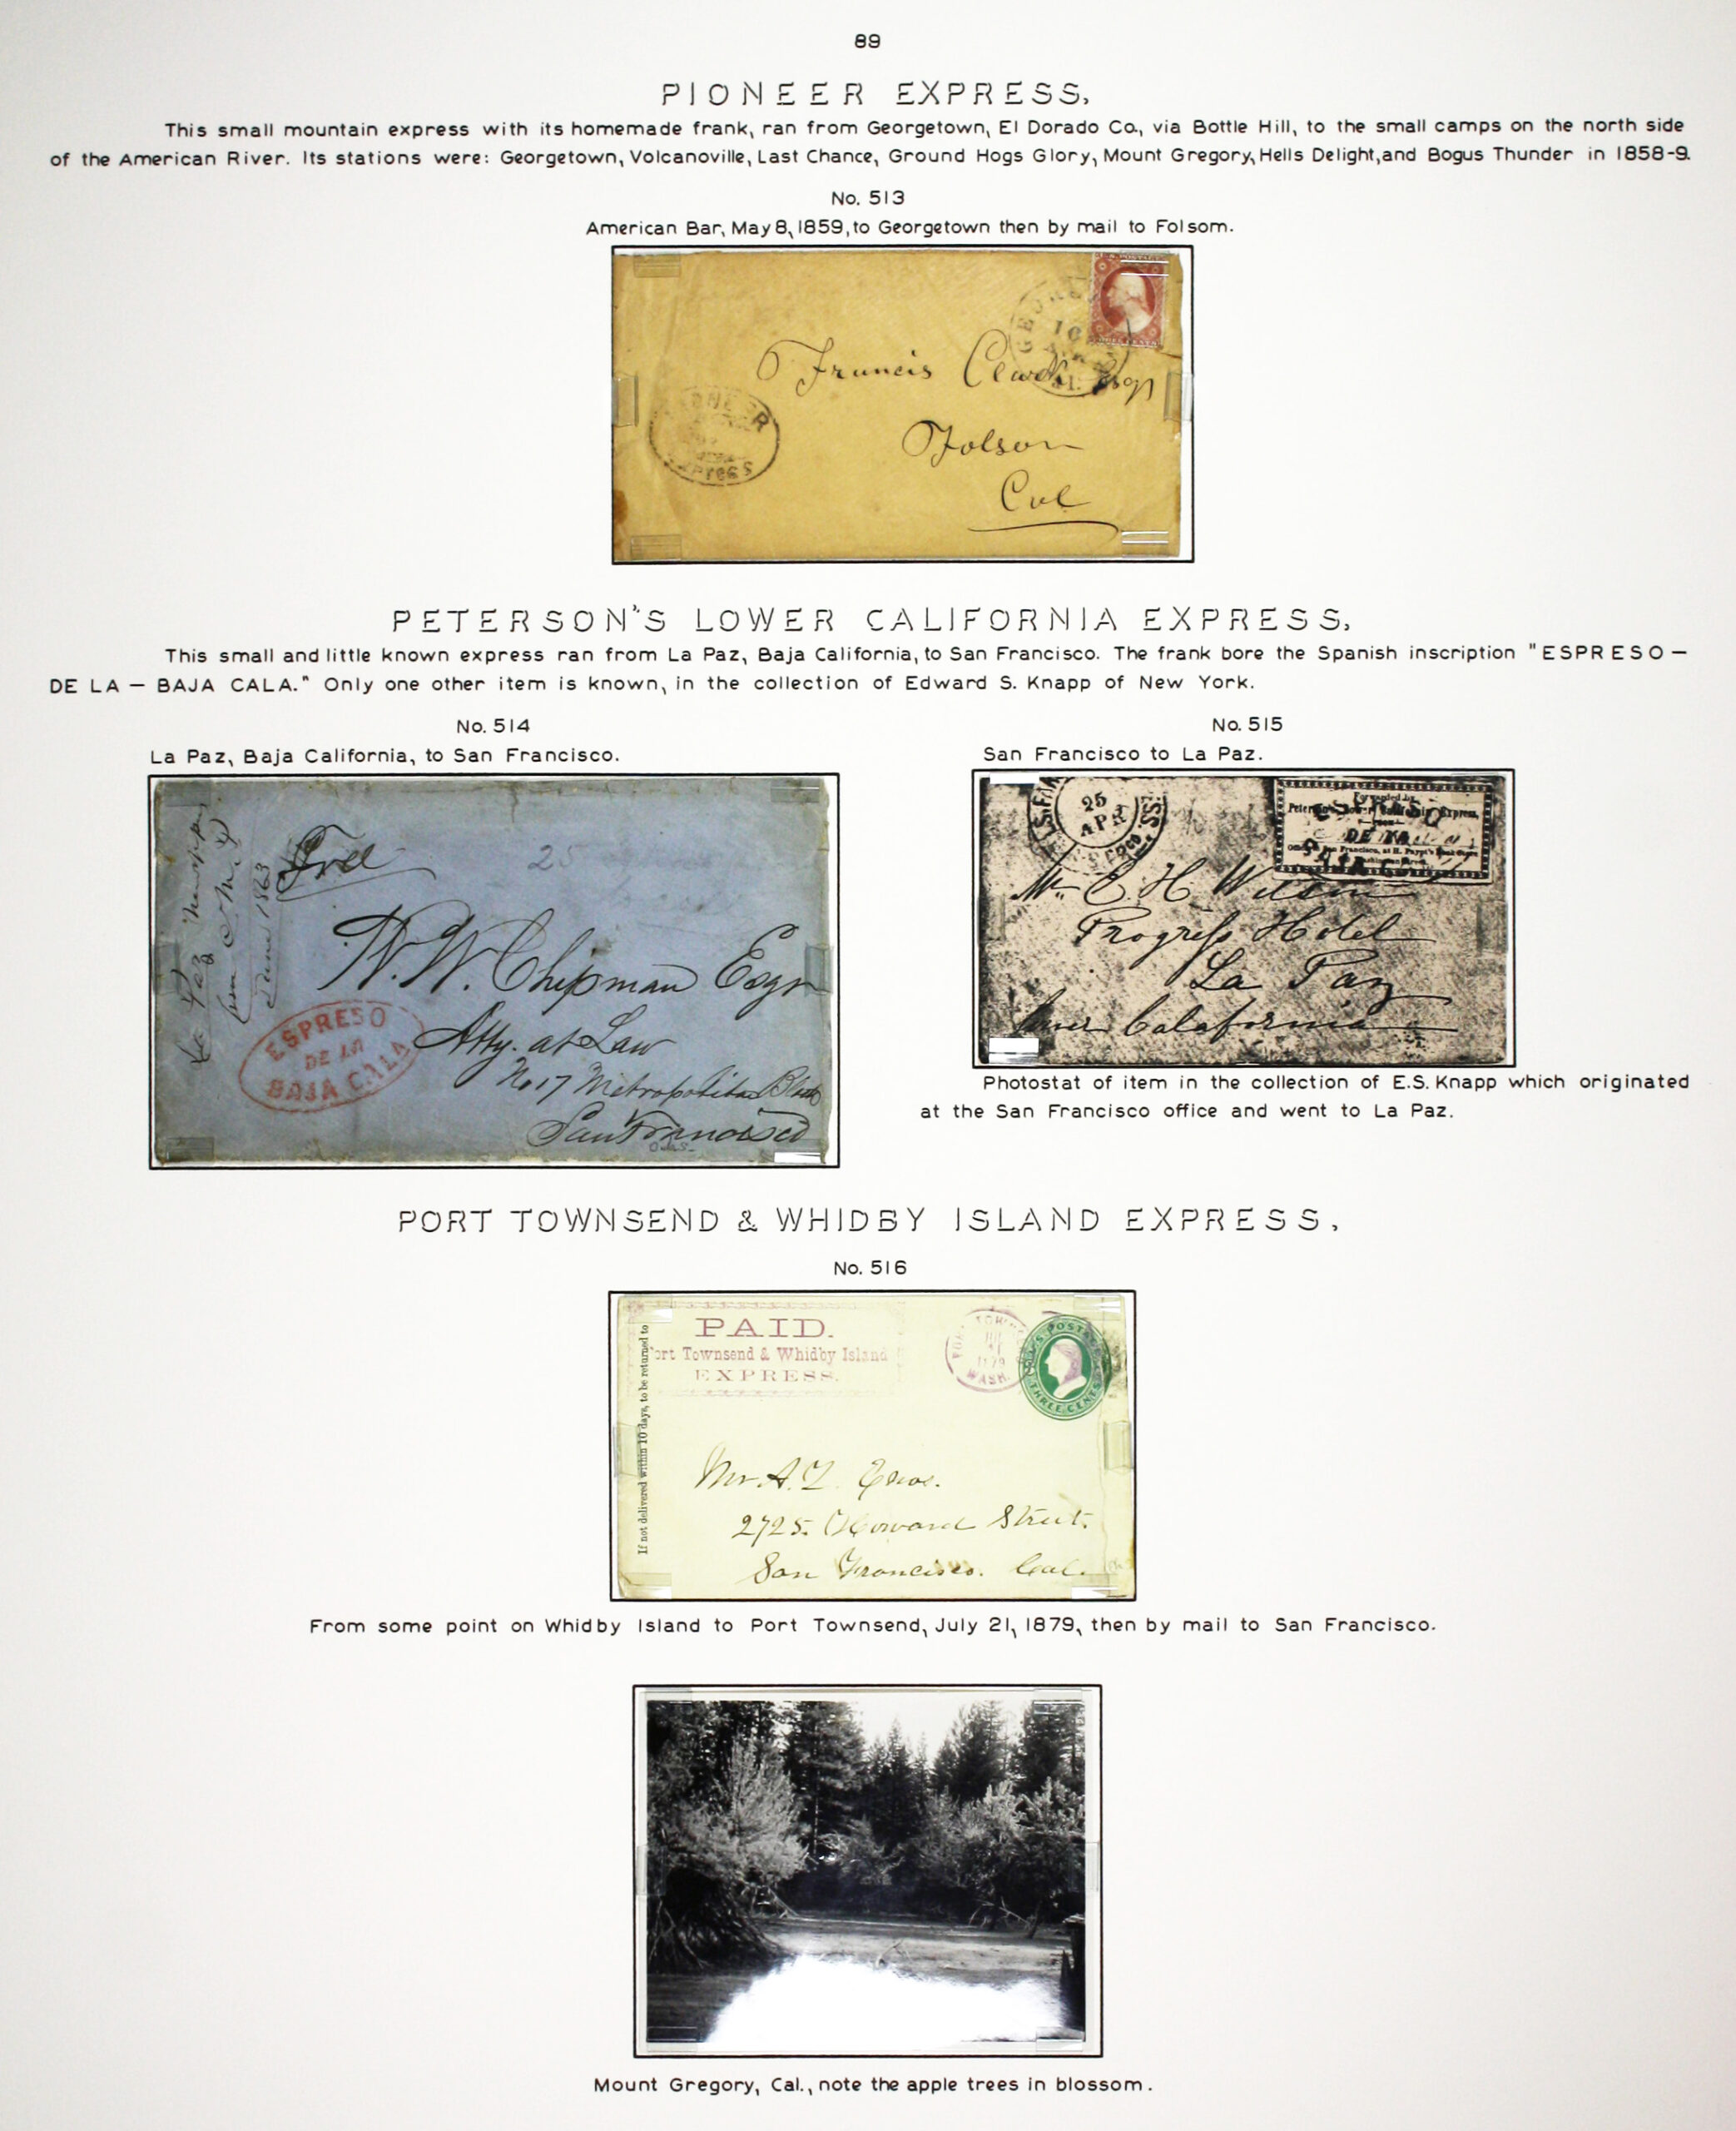 Historic exhibit Panel #89 featuring letter covers, a photostat and a photograph. Long descriptions are available as page content. Image link will enlarge image.